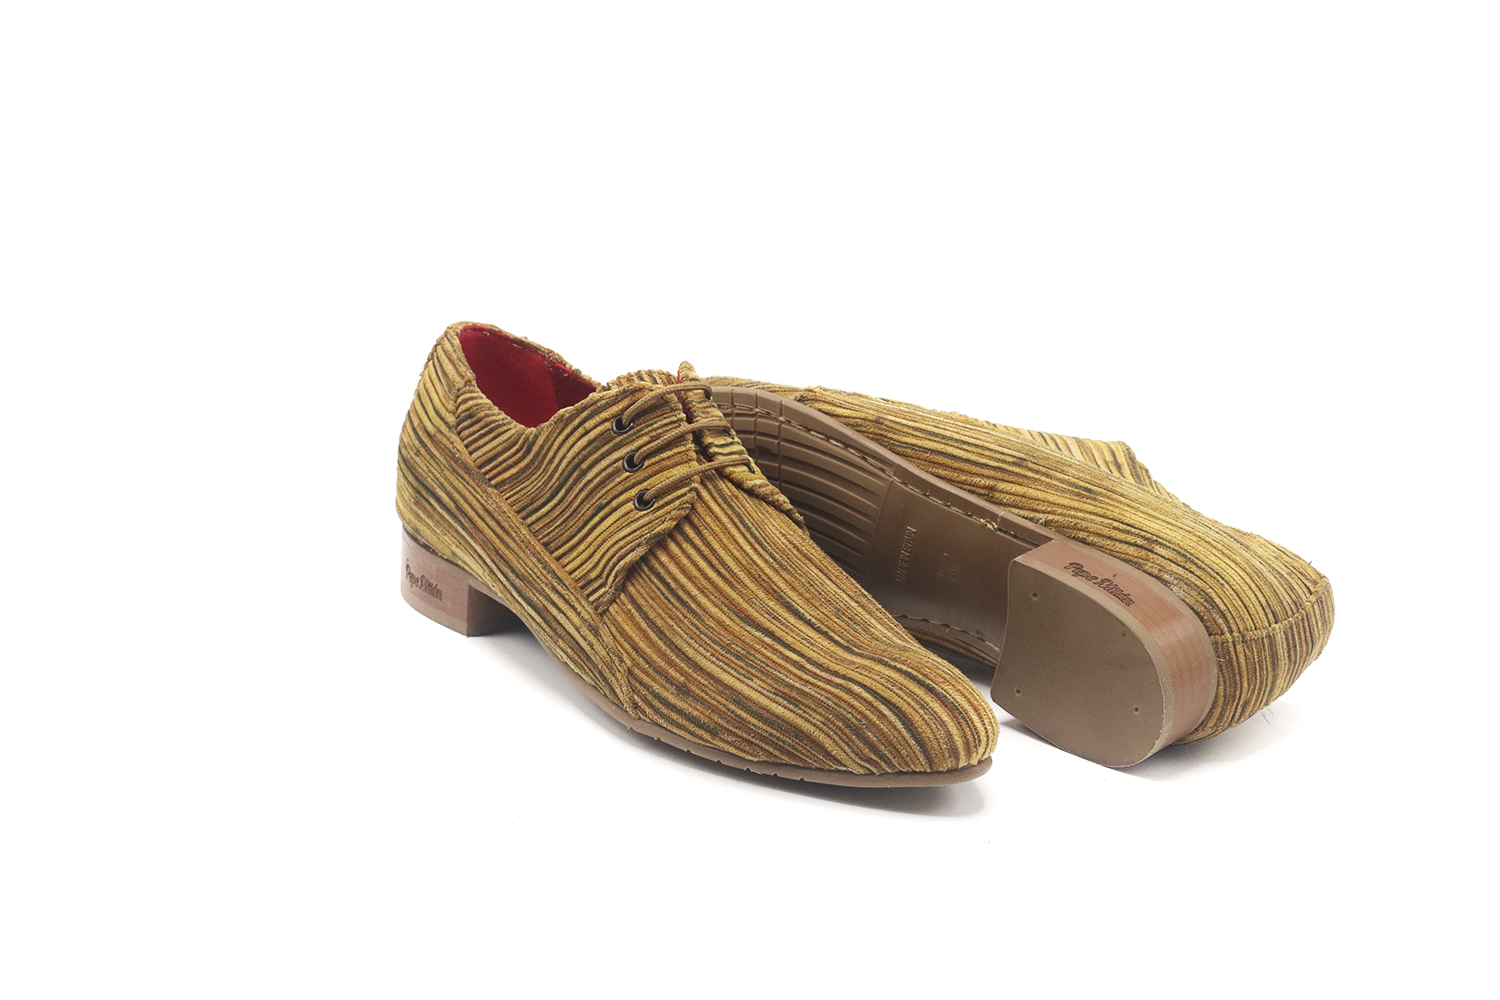 bamboo shoes